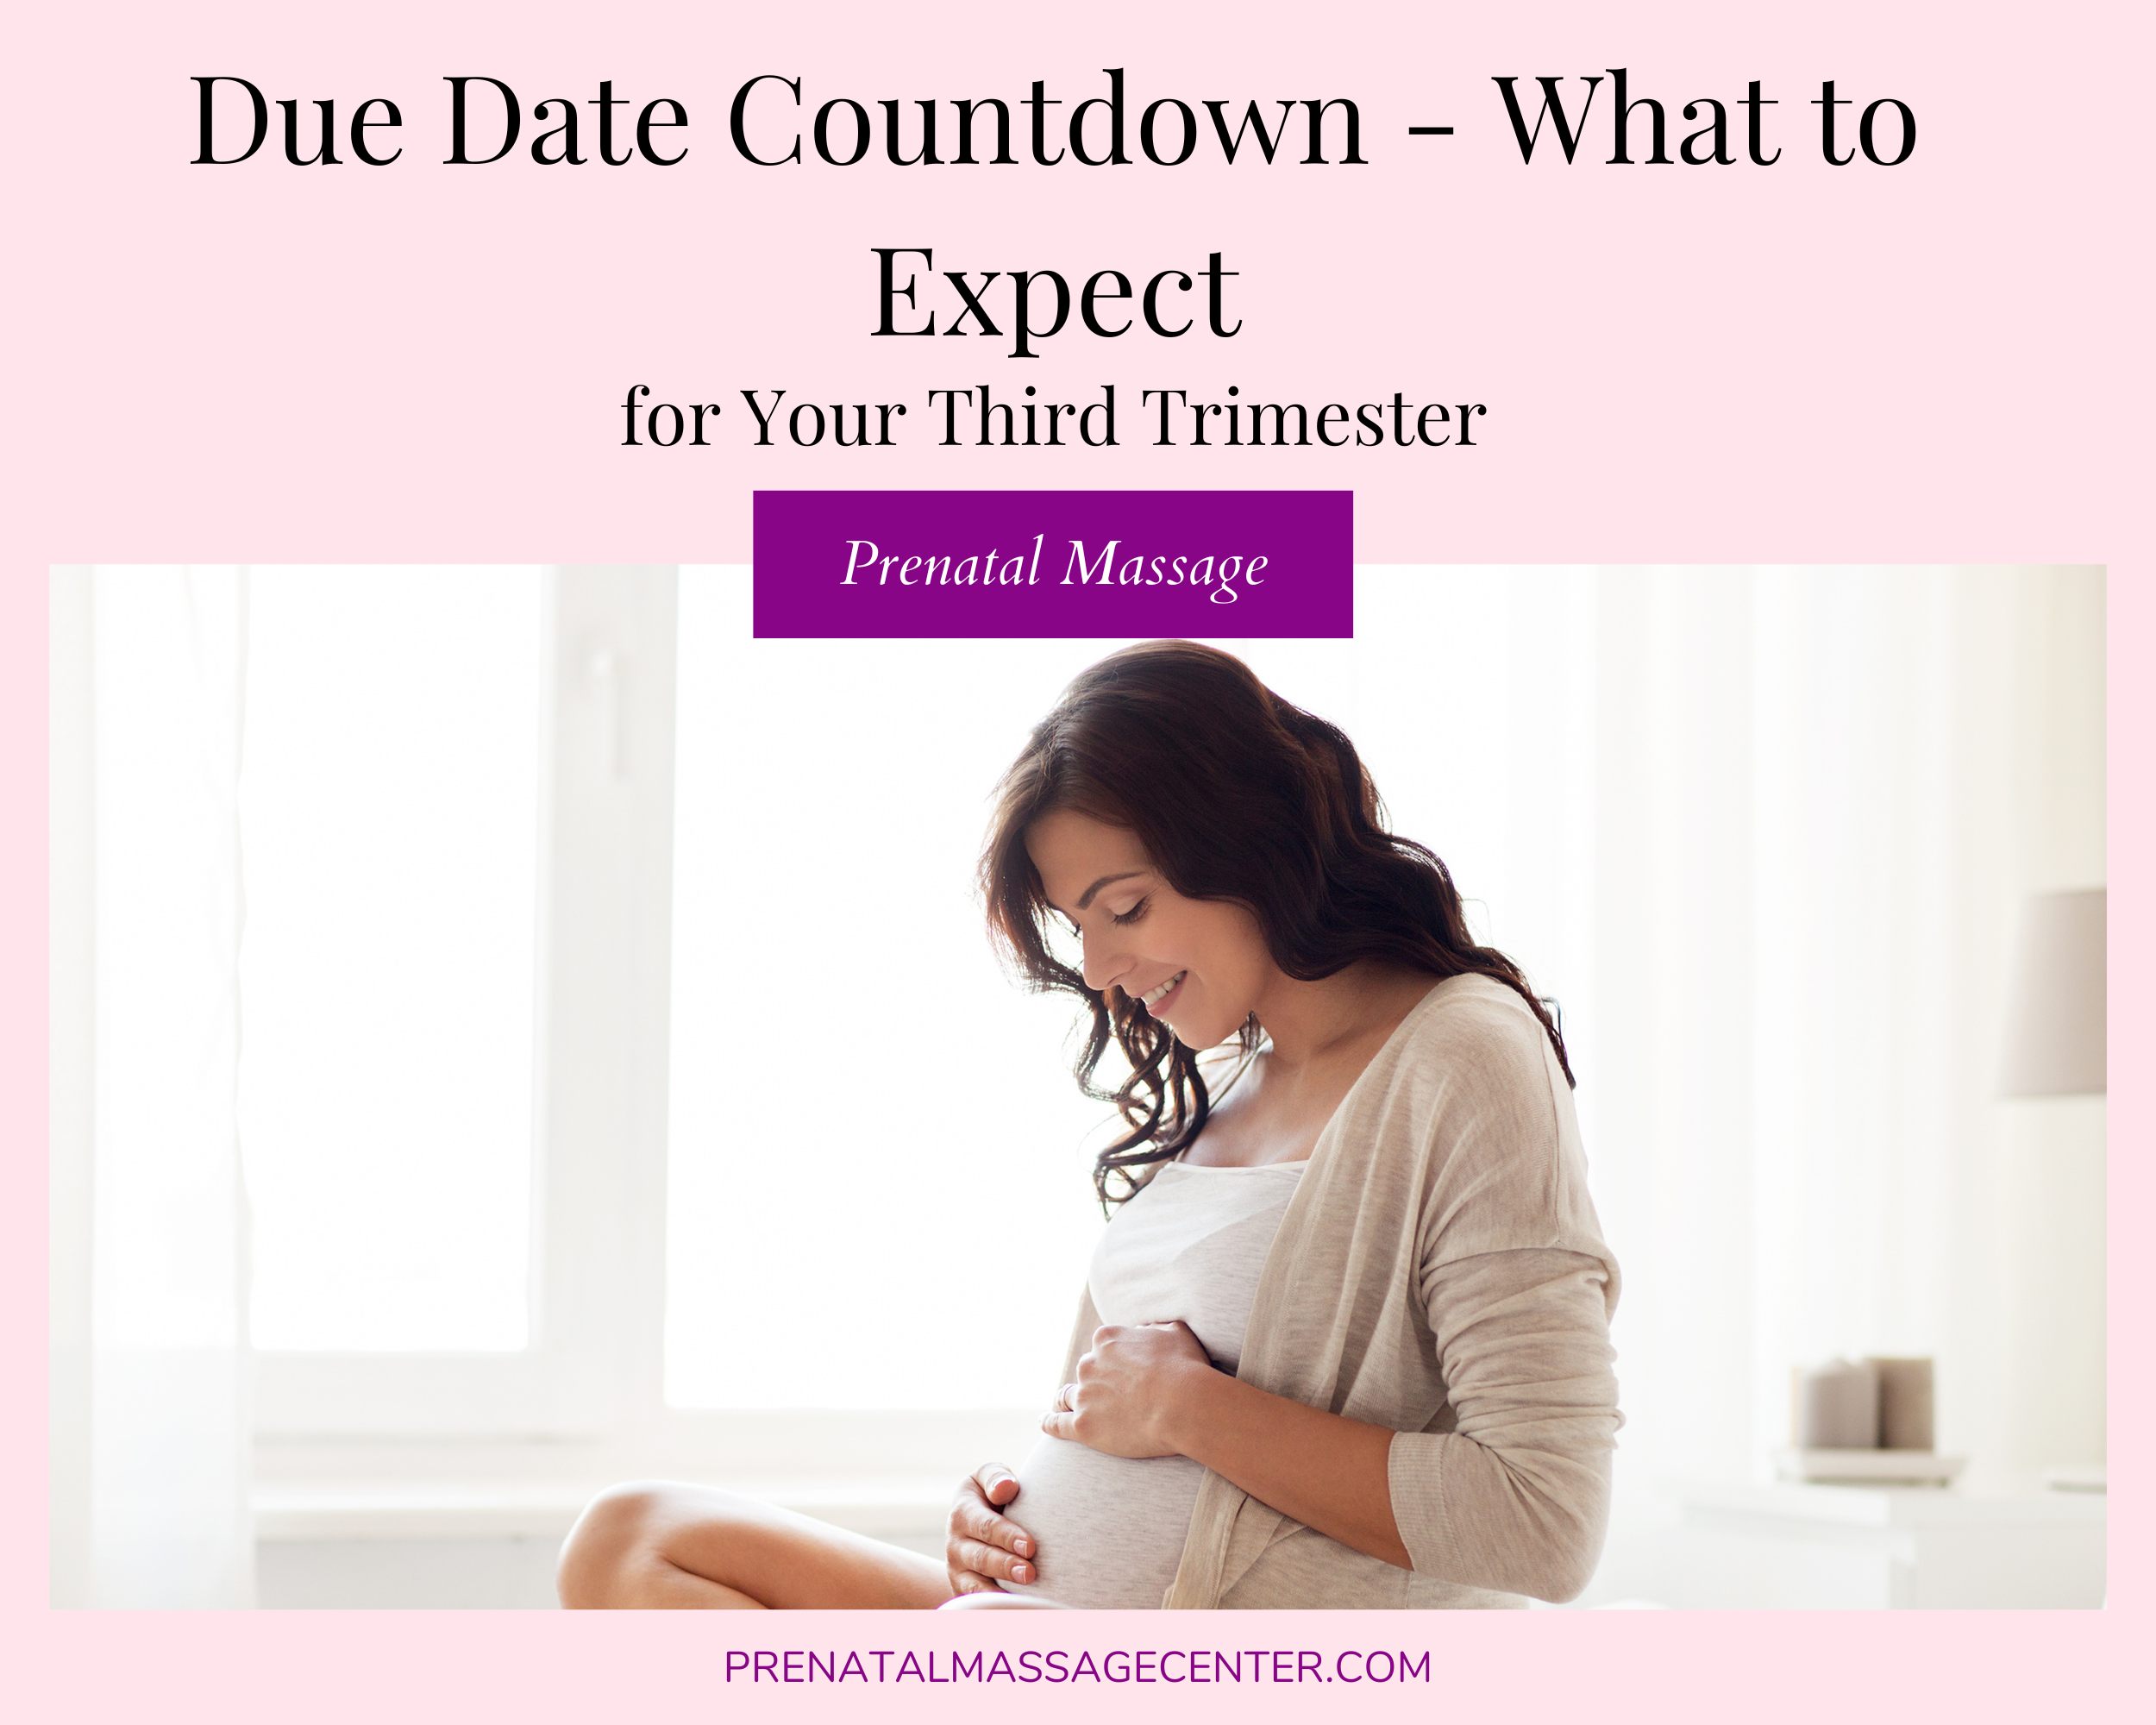 Due Date Countdown Guide - What to Expect in Your Third Trimester